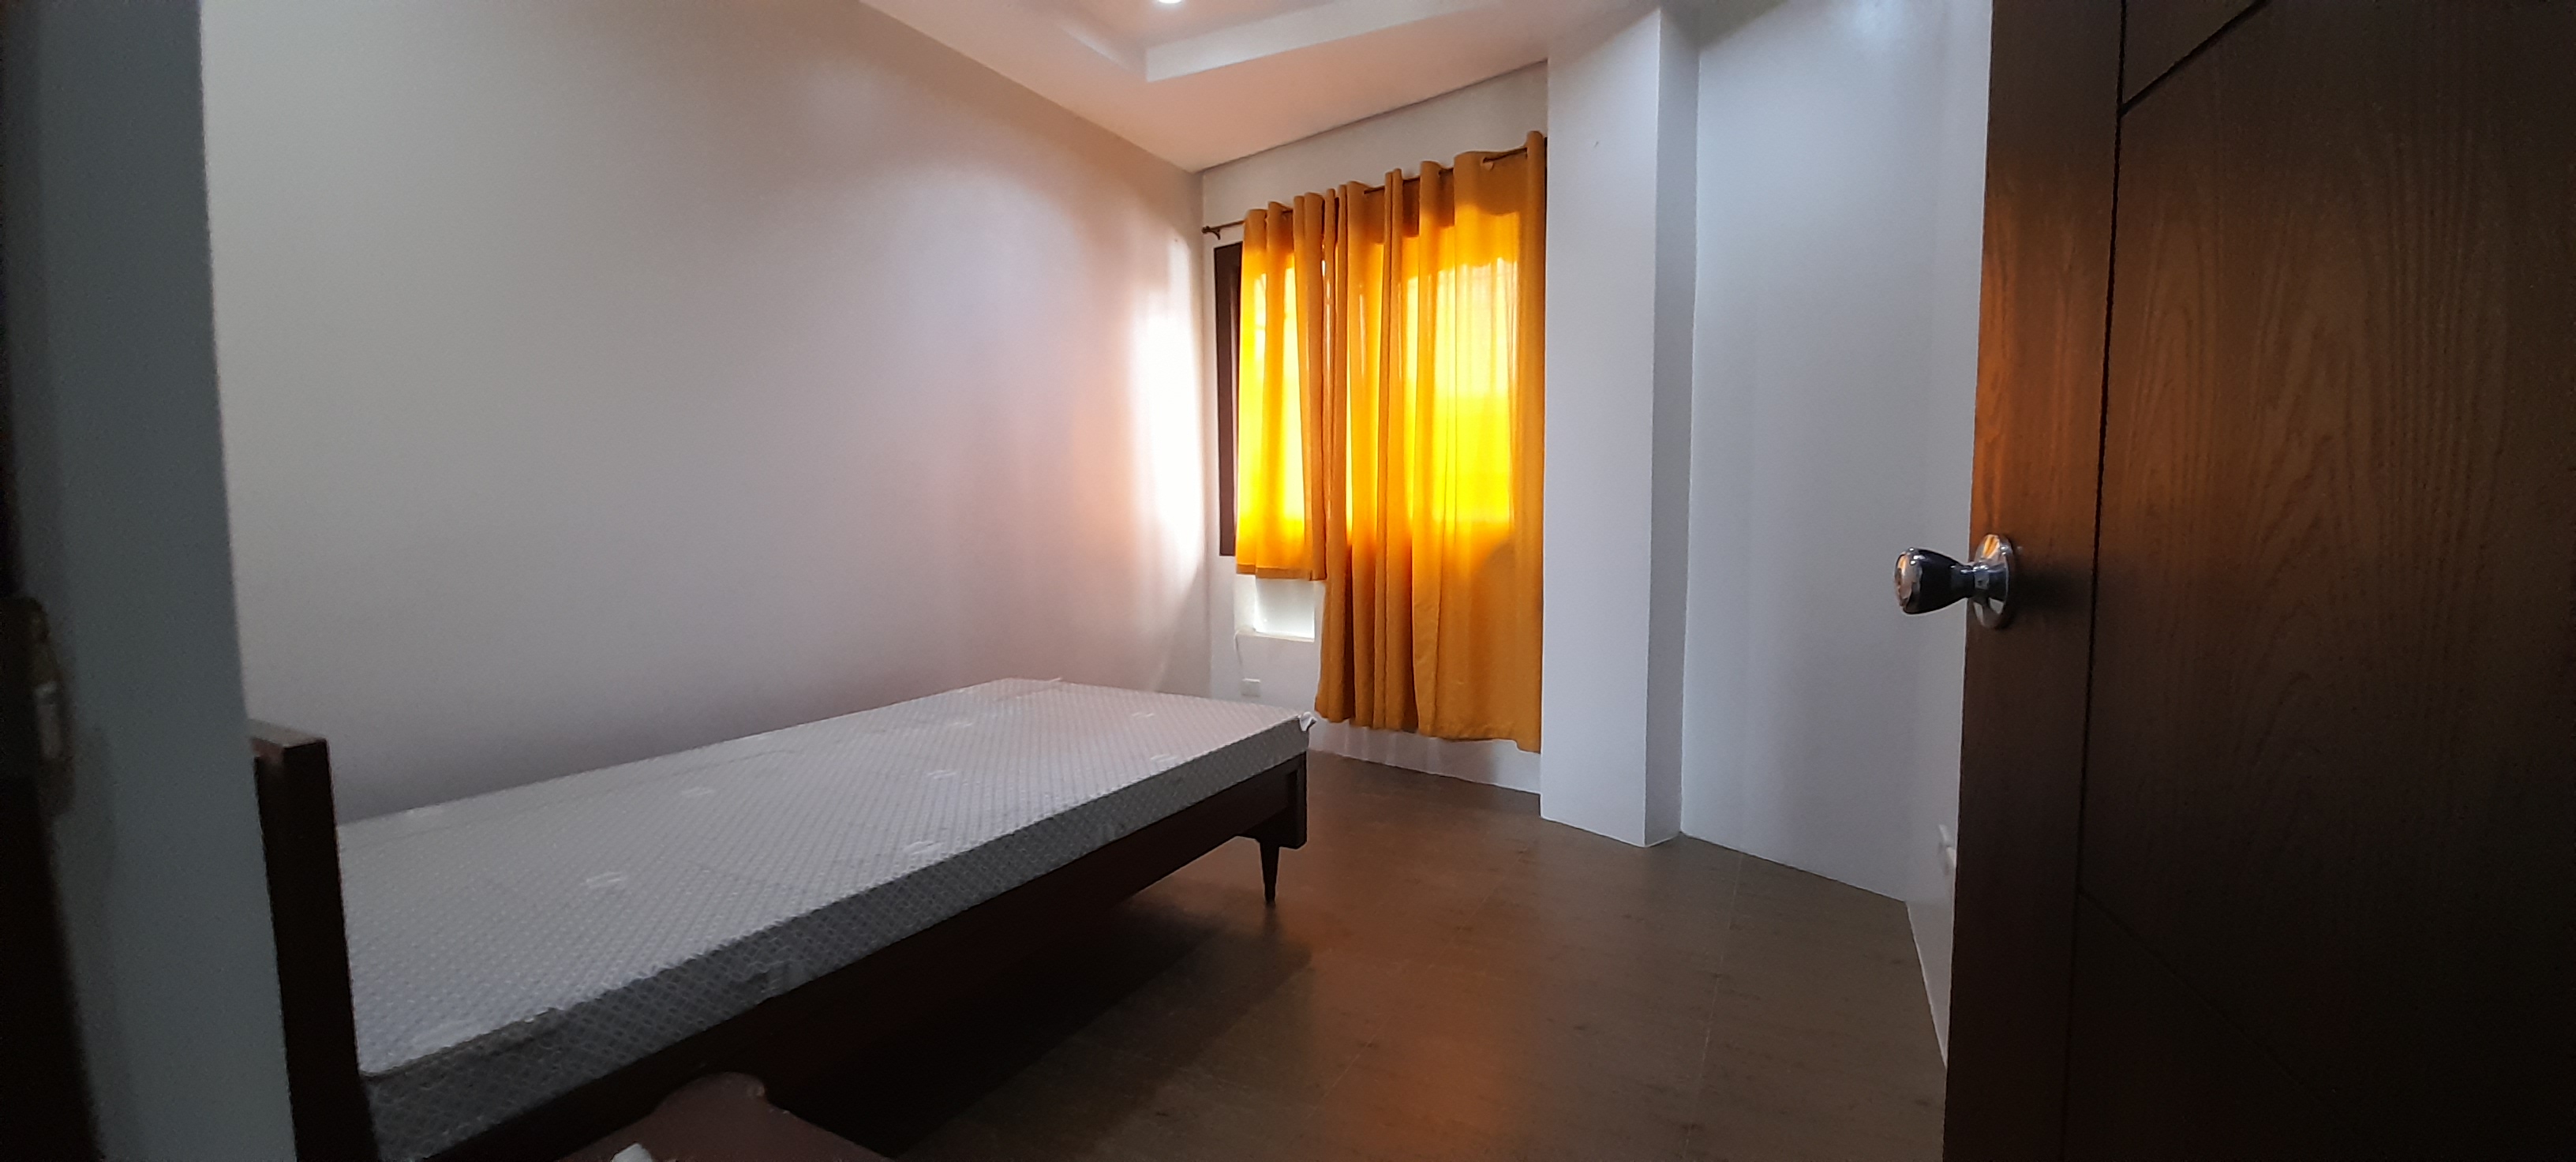 5-bedroom-semi-furnished-house-located-in-guadalupe-cebu-city